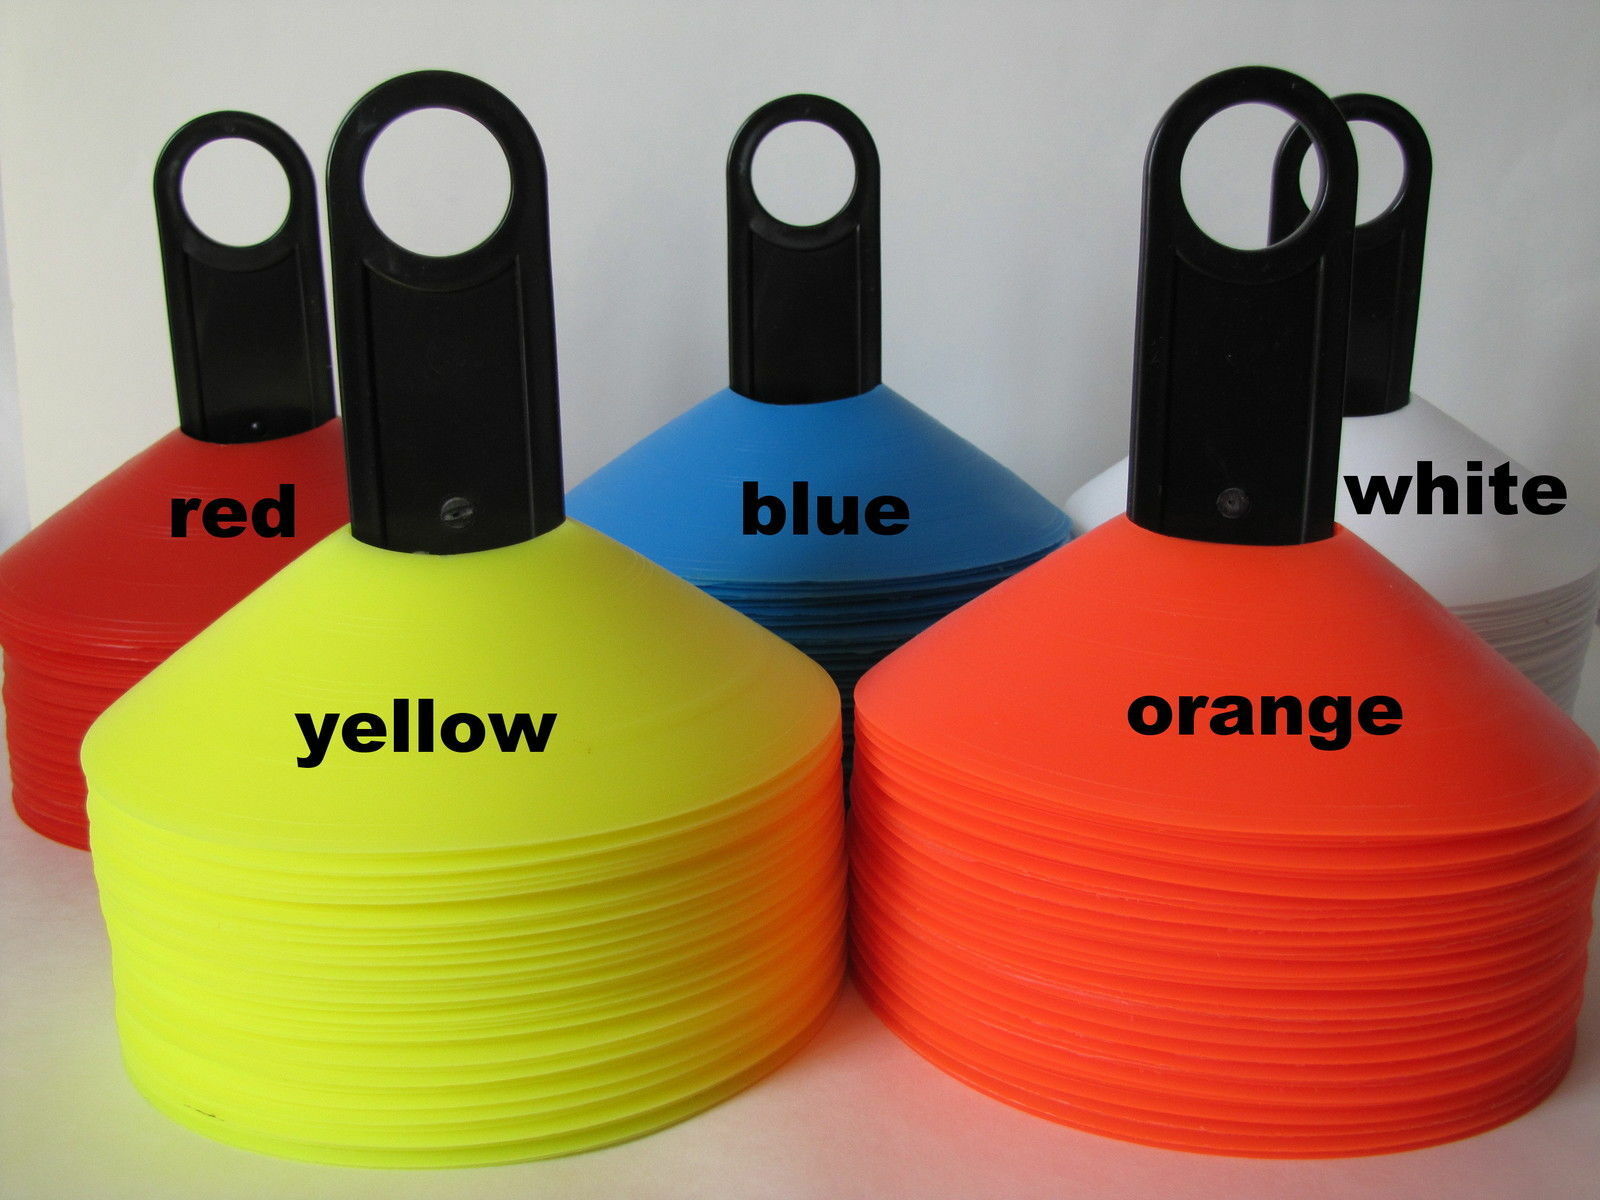 25pc Heavy Duty Field Marking Disc Cones,red Or Blue,add Holder For $5,us Seller